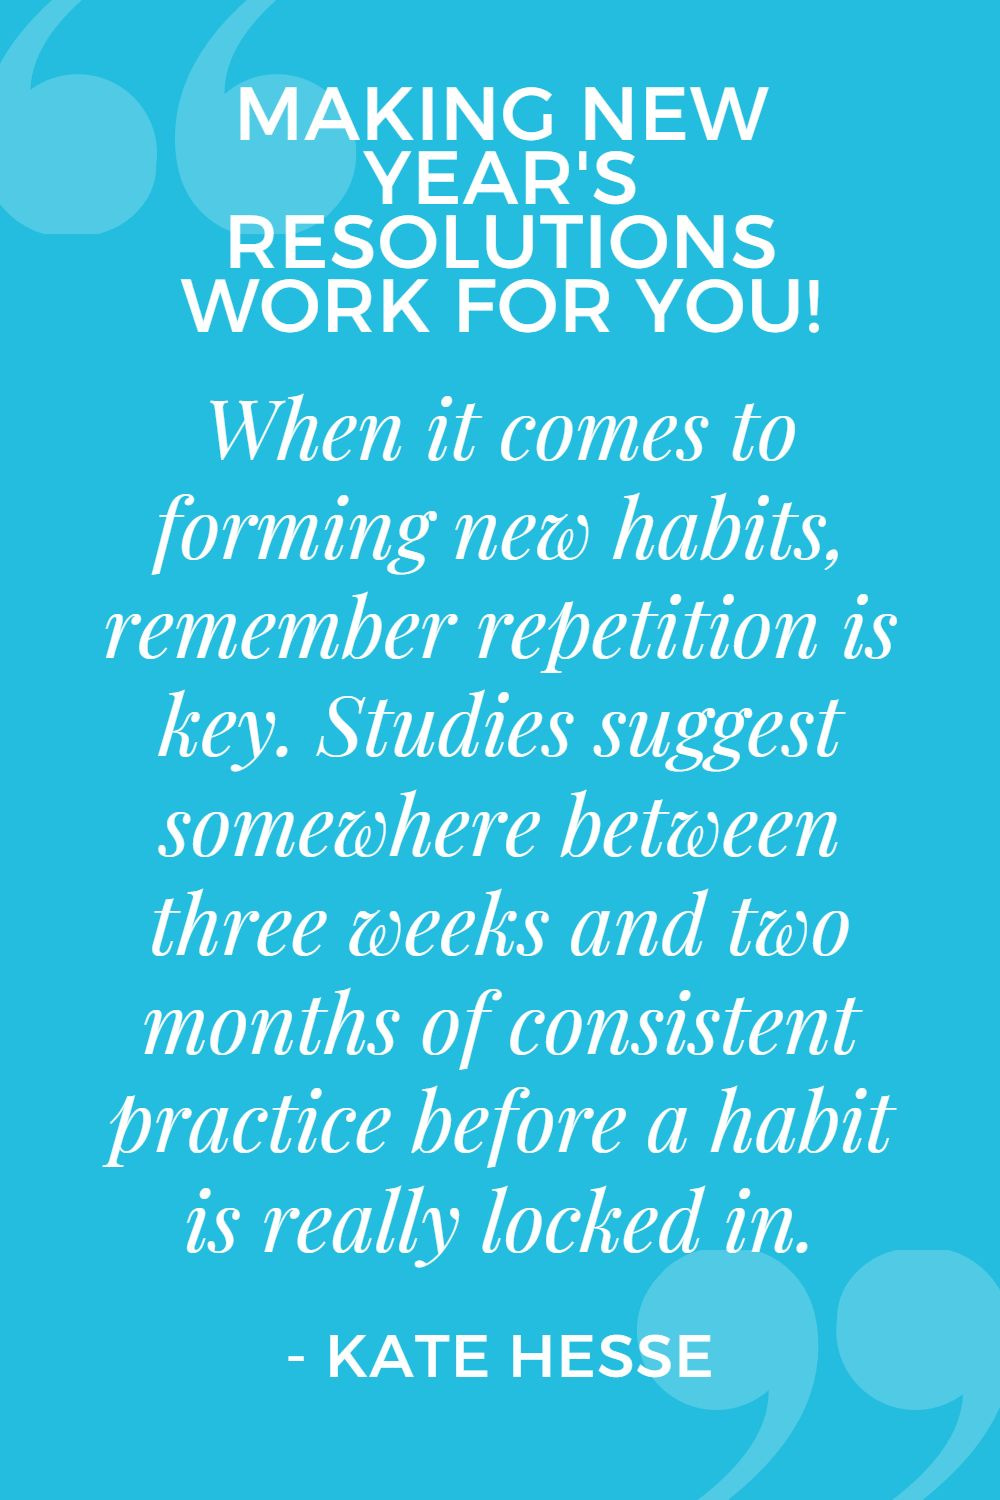 When it comes to forming new habits, remember repetition is key. Studies suggest somewhere between three weeks and two months of consistent practice before a habit is really locked in.